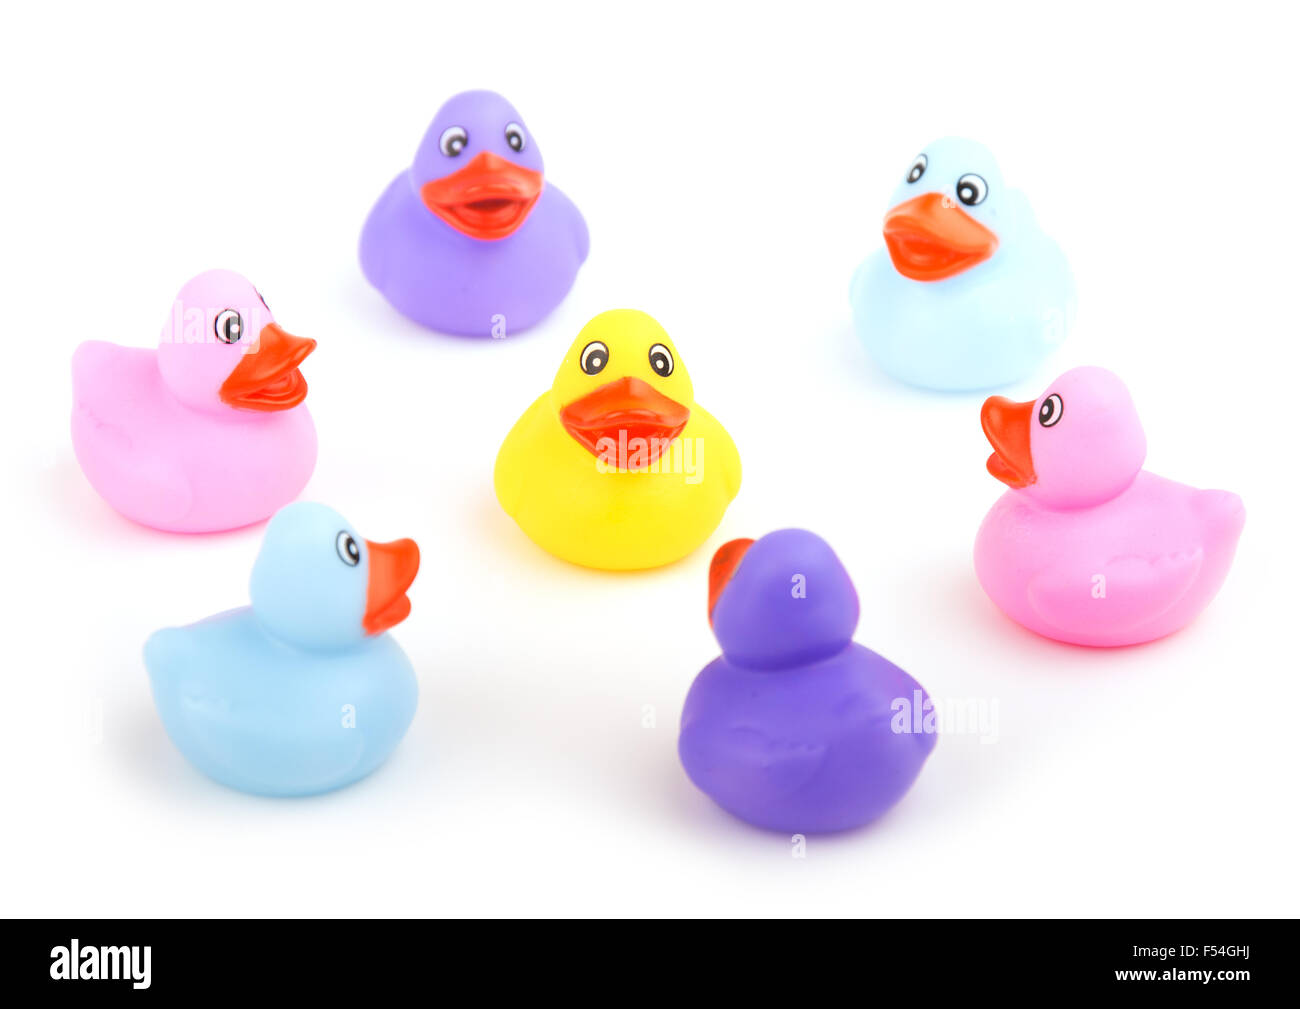 Group of rubber ducks talking together - concept of being friends and including everyone - focus on yellow duckling Stock Photo